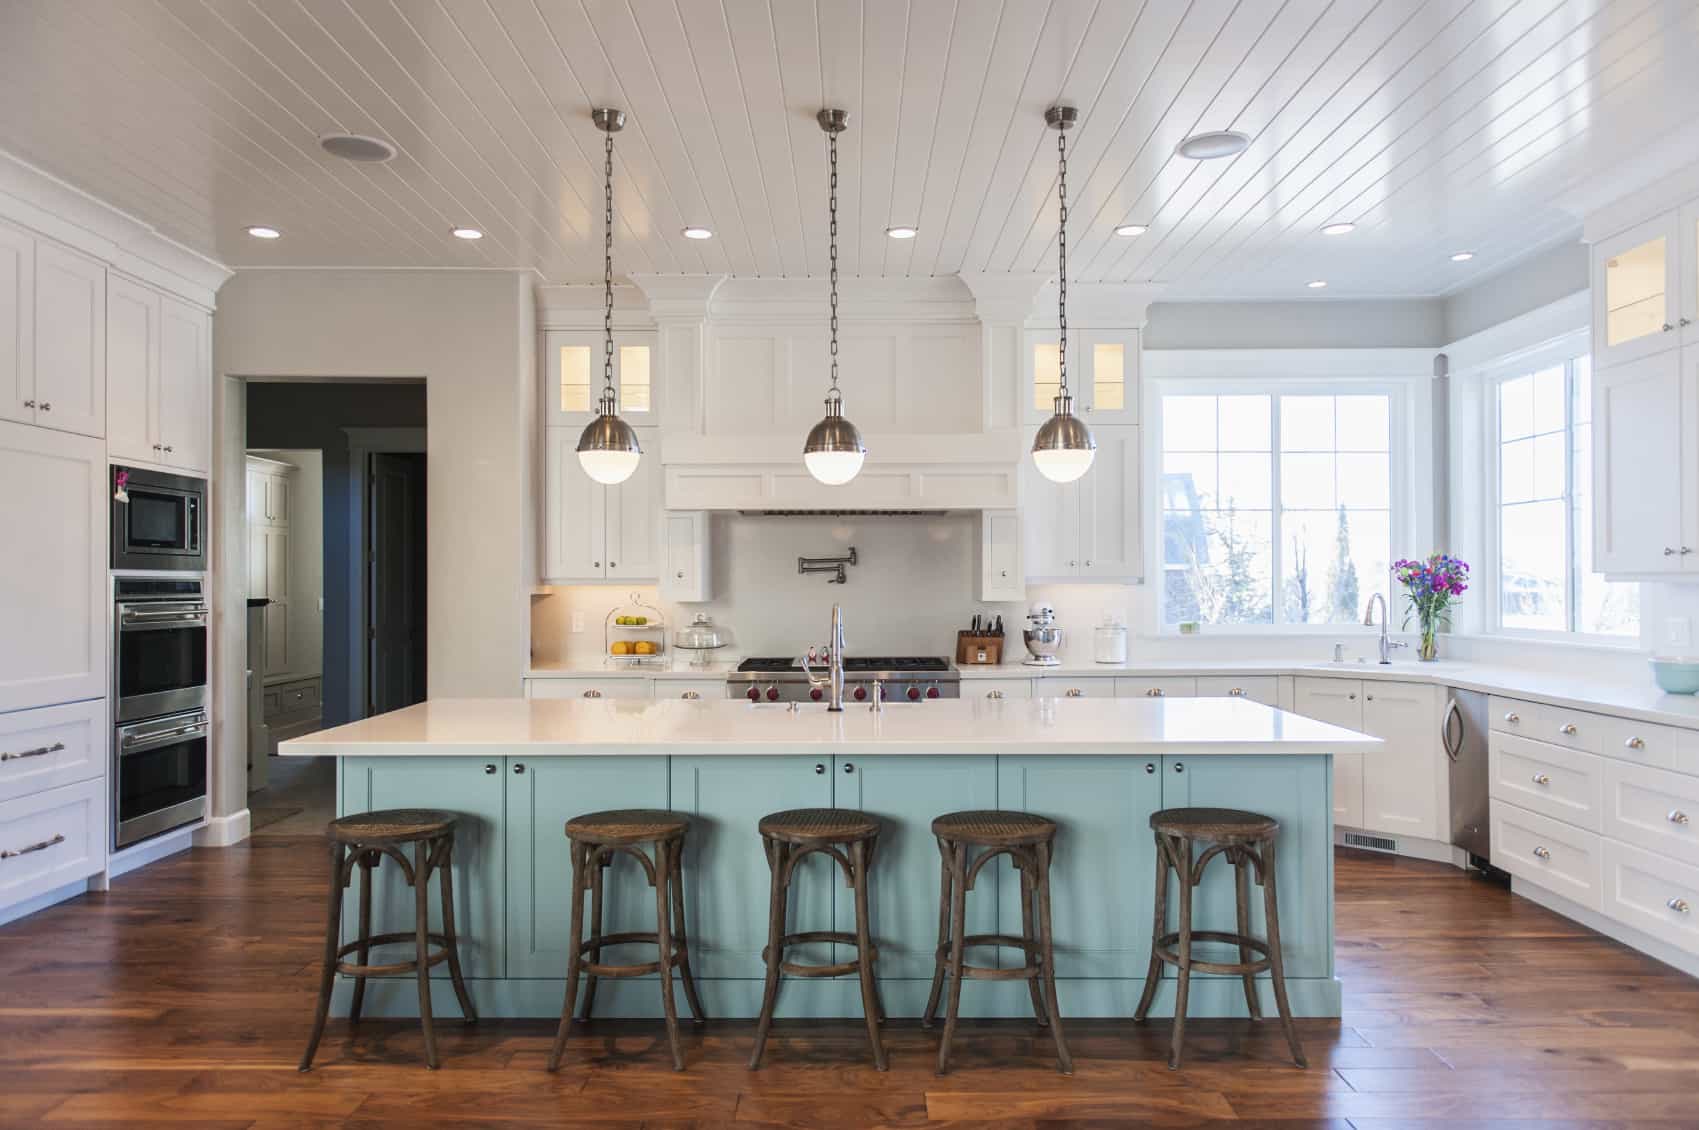 two-tone-kitchen-cabinet-and-painted-wood-floors-with-barstools-also-pendant-lighting-and-windows-with-beadboard-ceilings-plus-painting-hardwood-floors-and-benjamin-moore-floor-paint